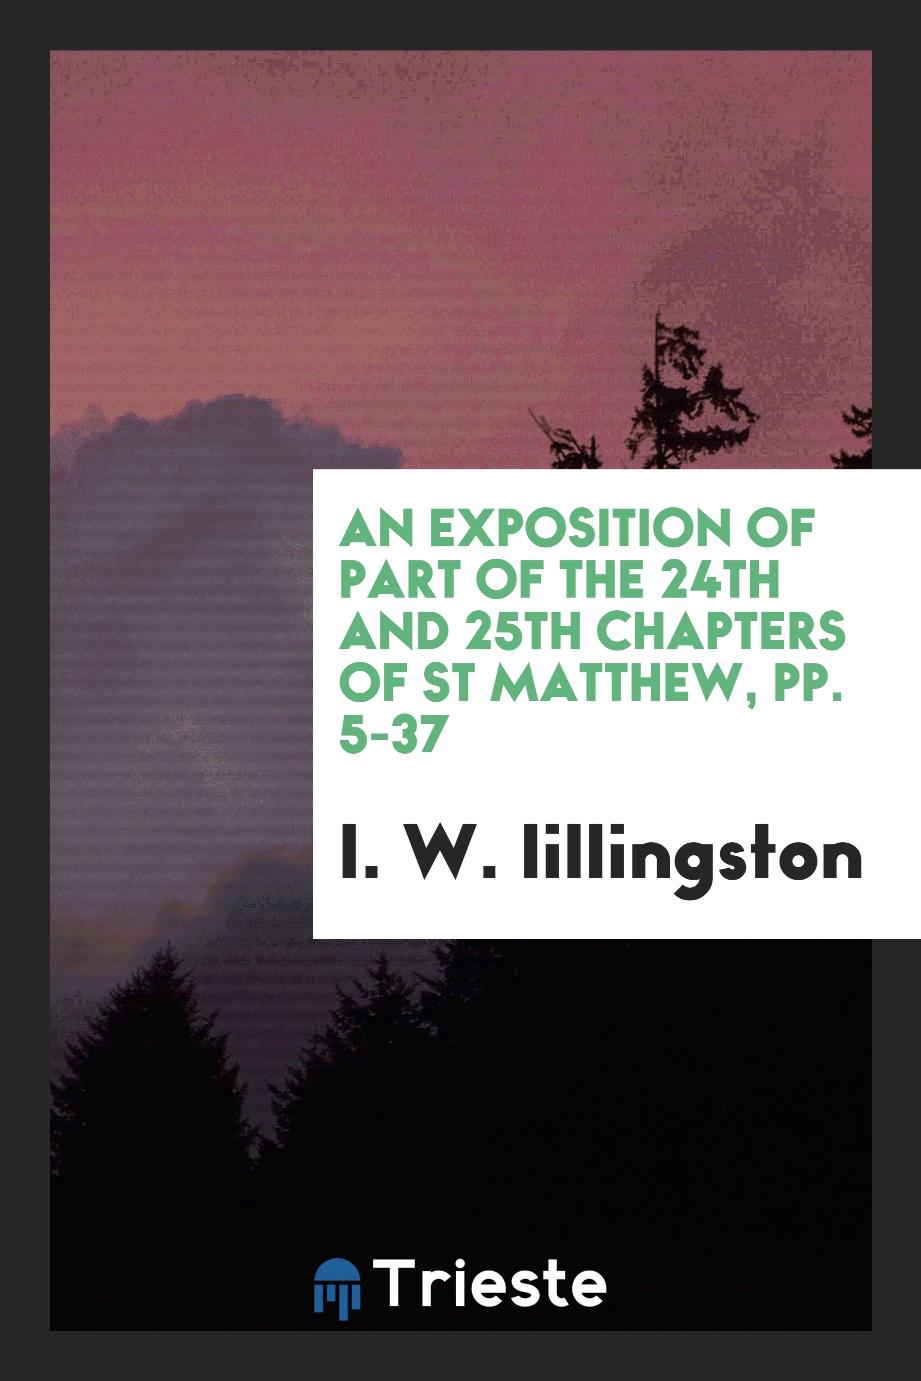 An exposition of part of the 24th and 25th chapters of ST Matthew, pp. 5-37